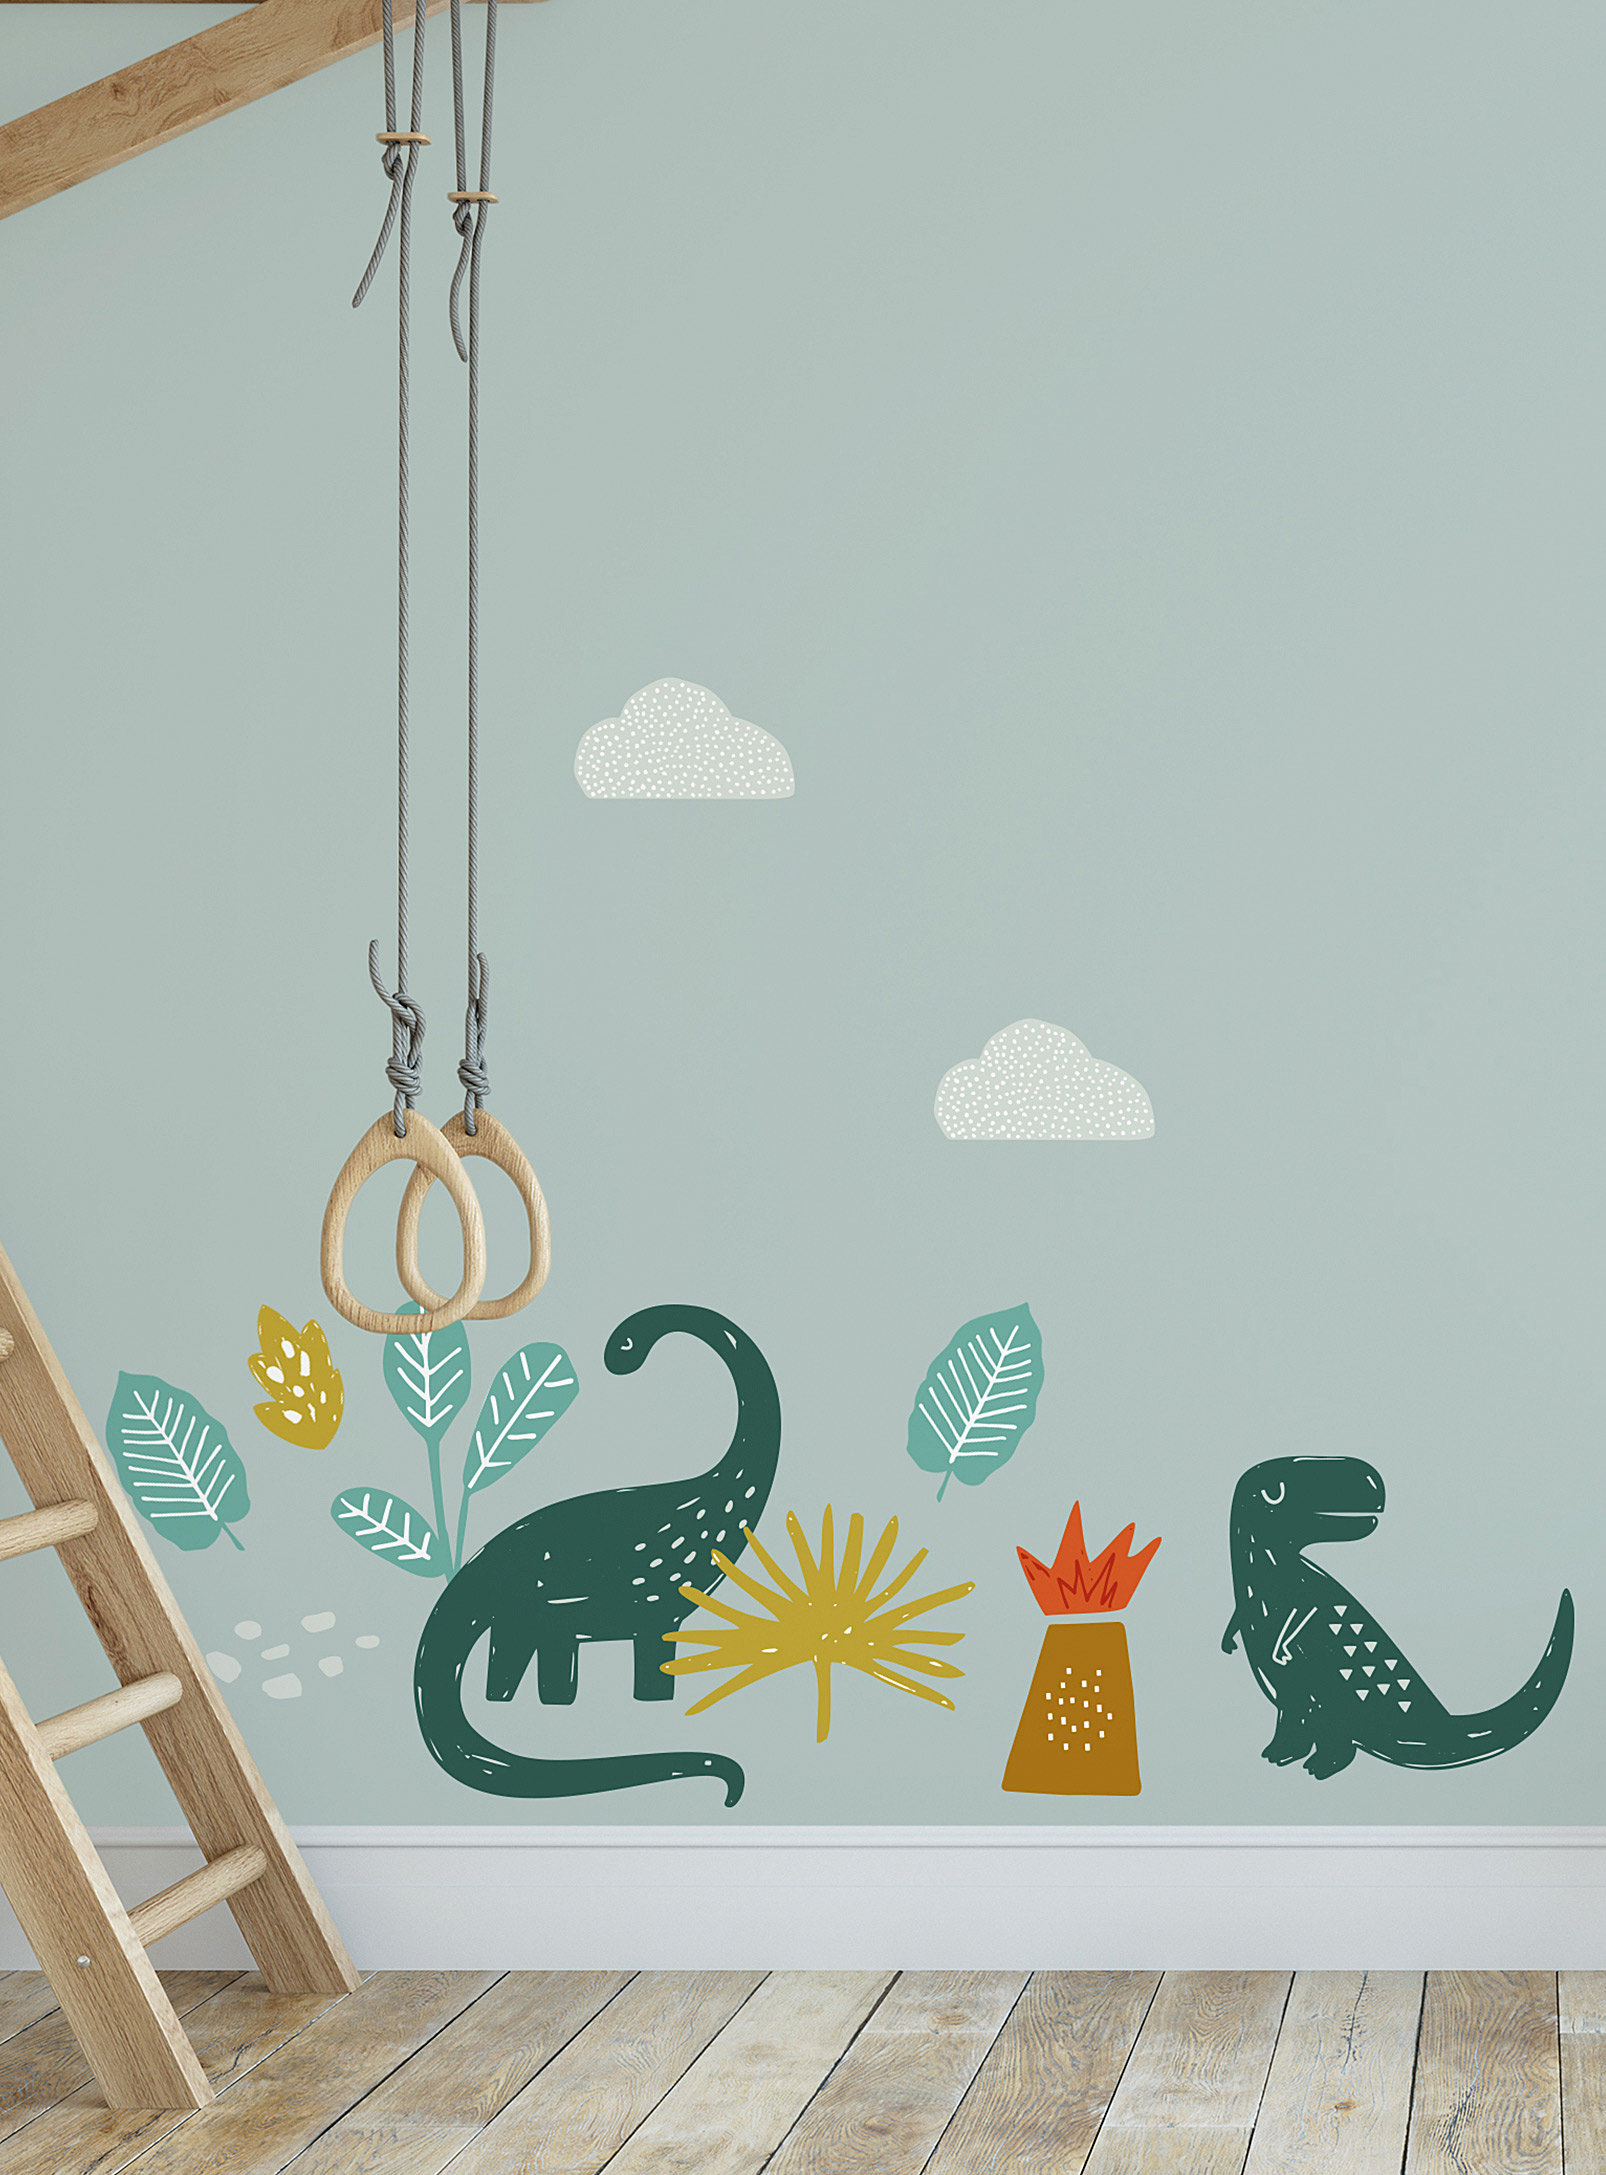 Meraki Dinomania Wall Decals In Collaboration With Artist Marie-france Auger In Green